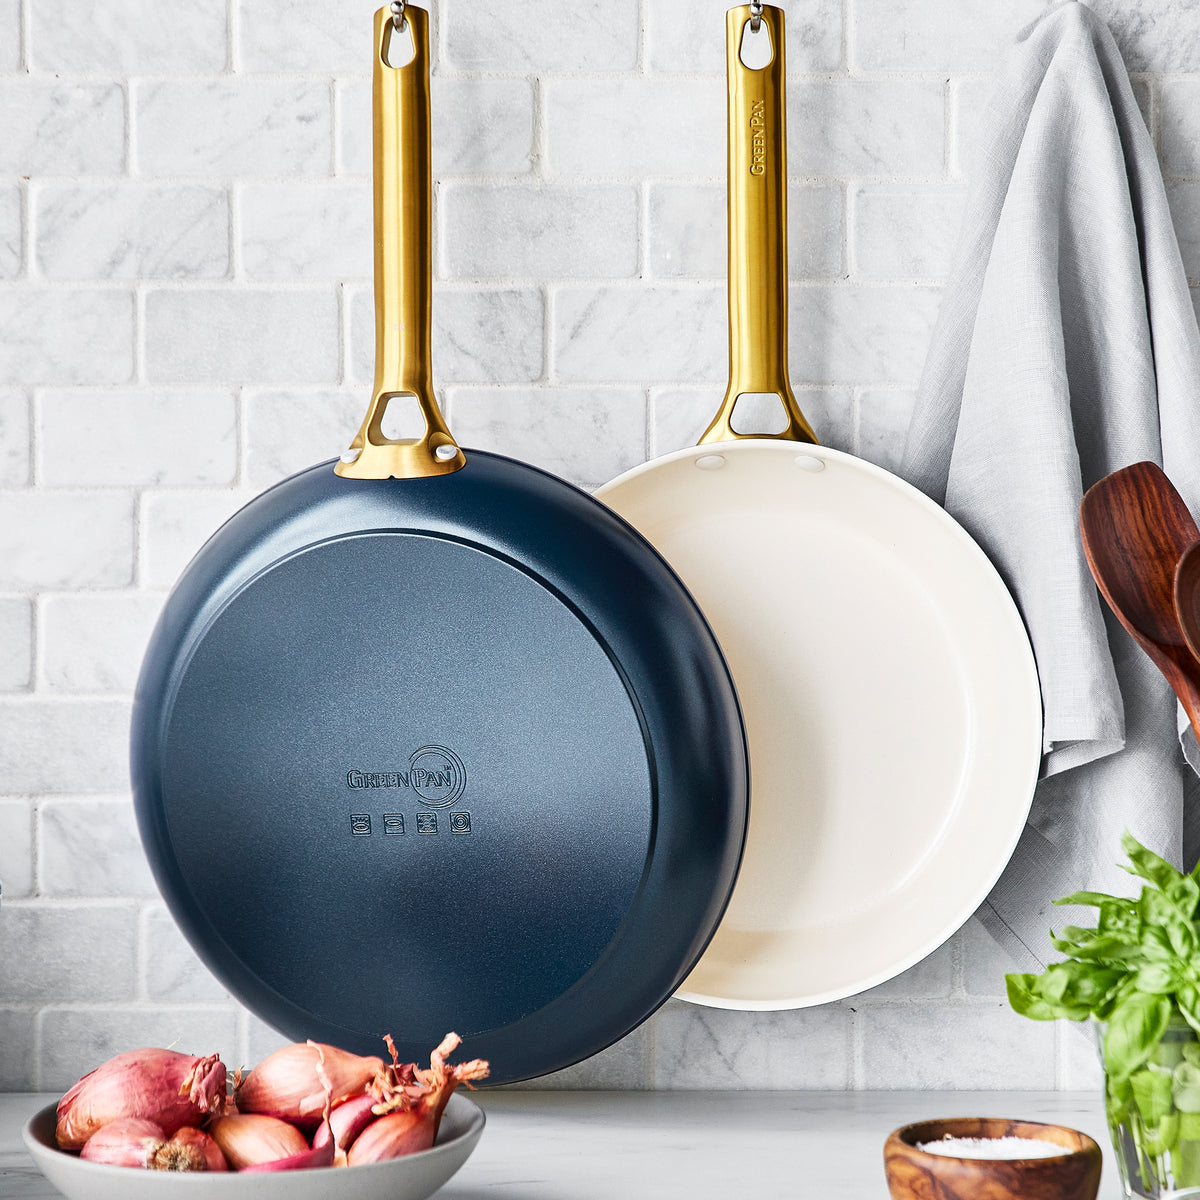 large and small navy fry pans hanging in front of grey tile backsplash.